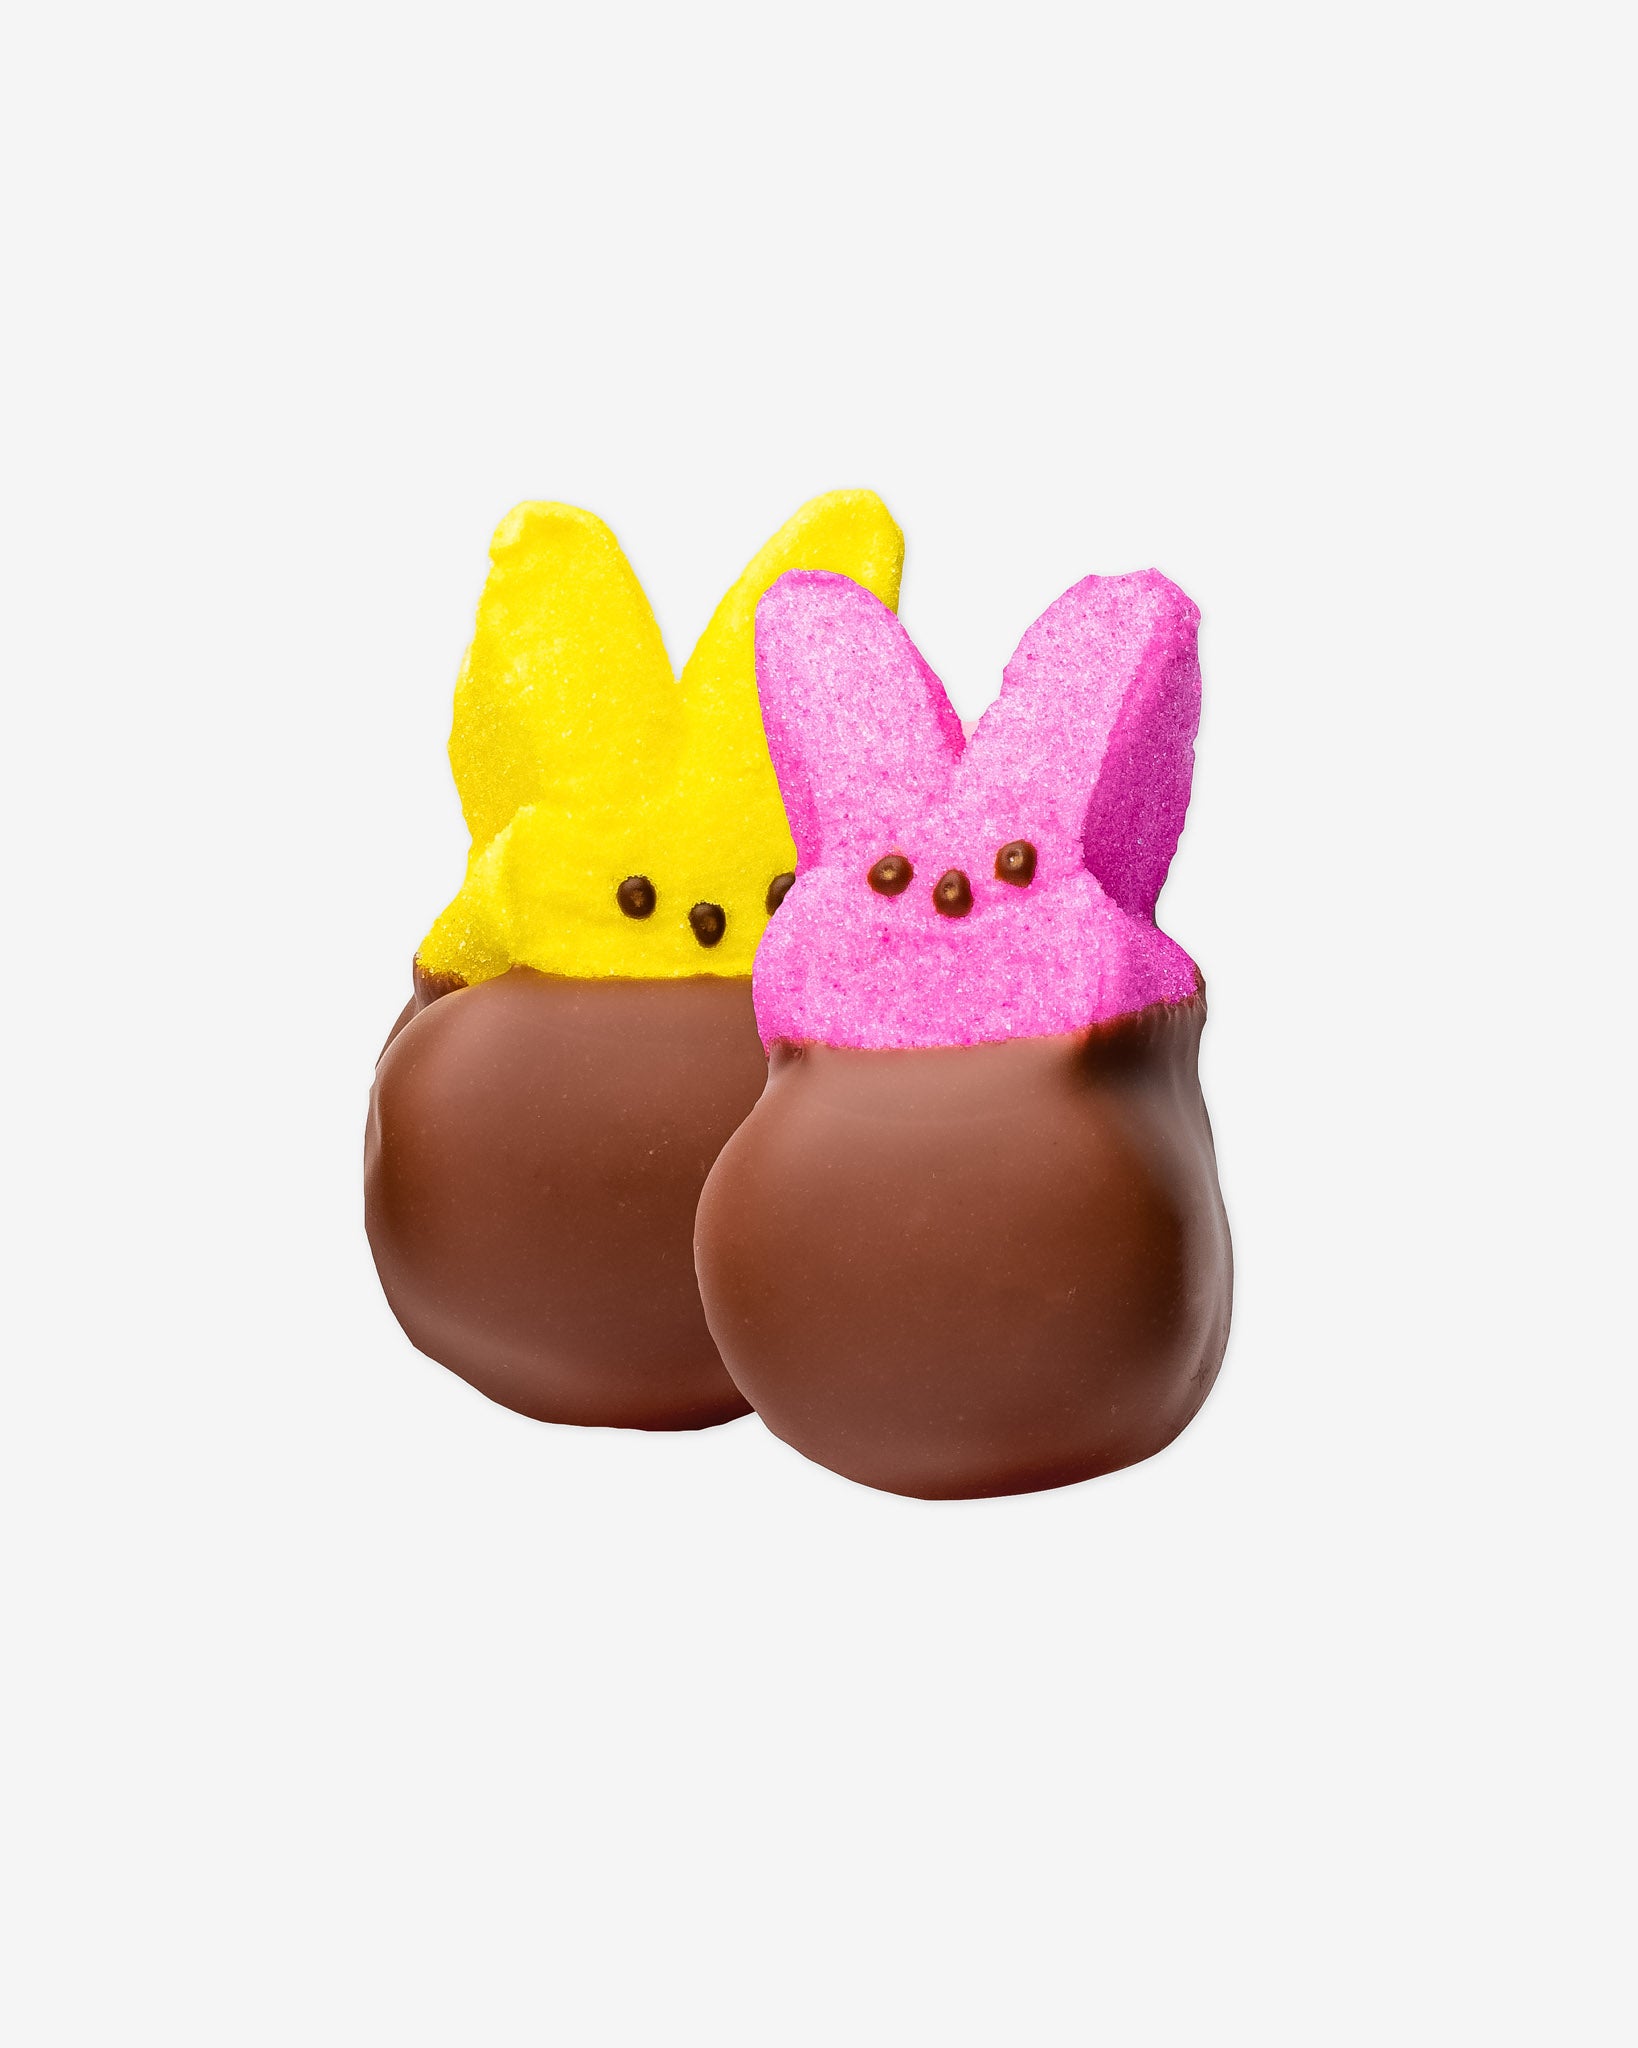 Chocolate Covered Peeps - Gourmet Easter Chocolate and Chocolate Gifts by Compartes LA